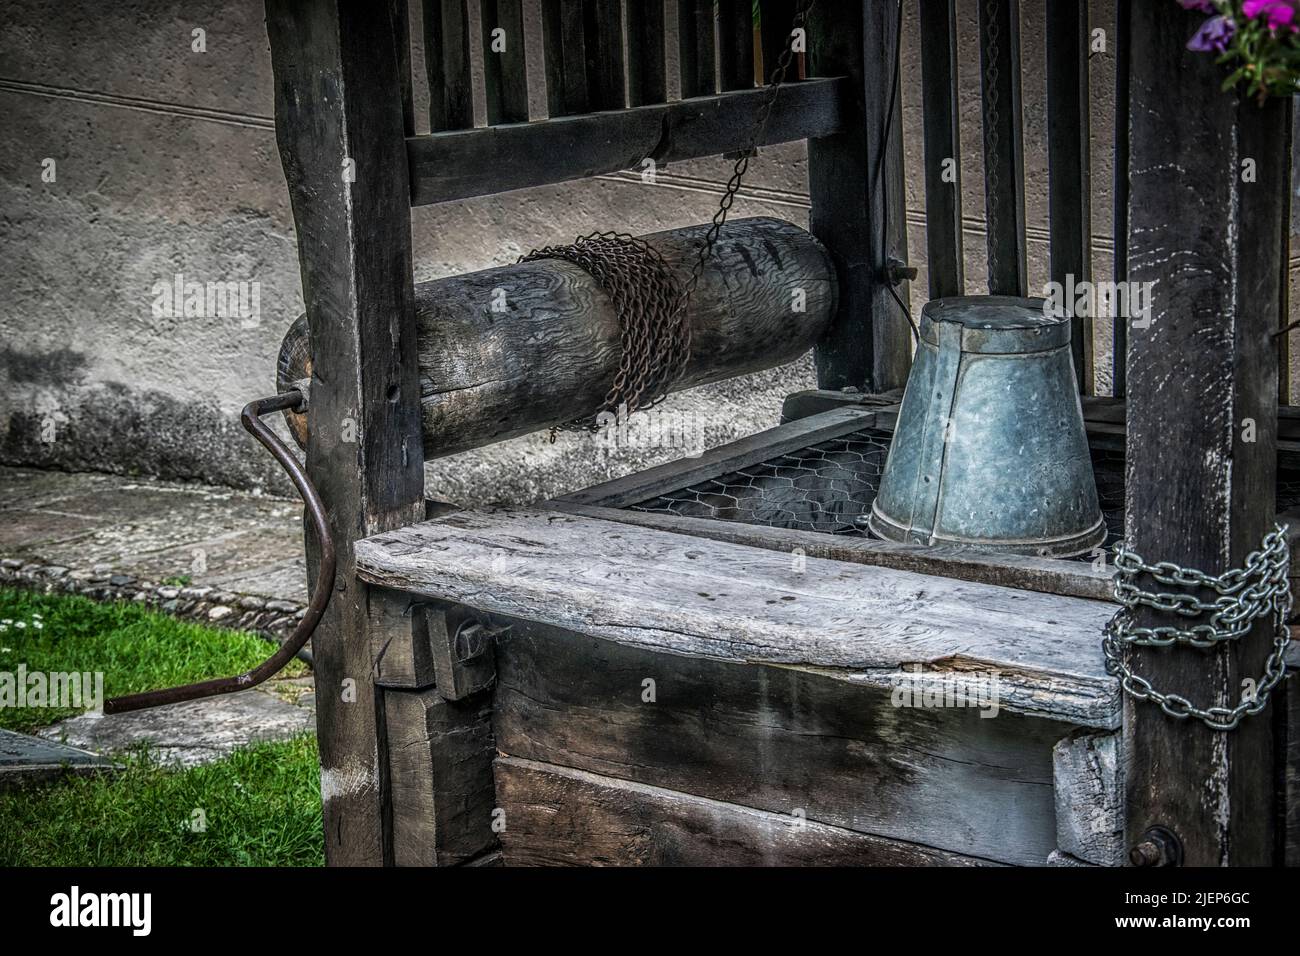 A metal bucket and other details of an old well Stock Photo